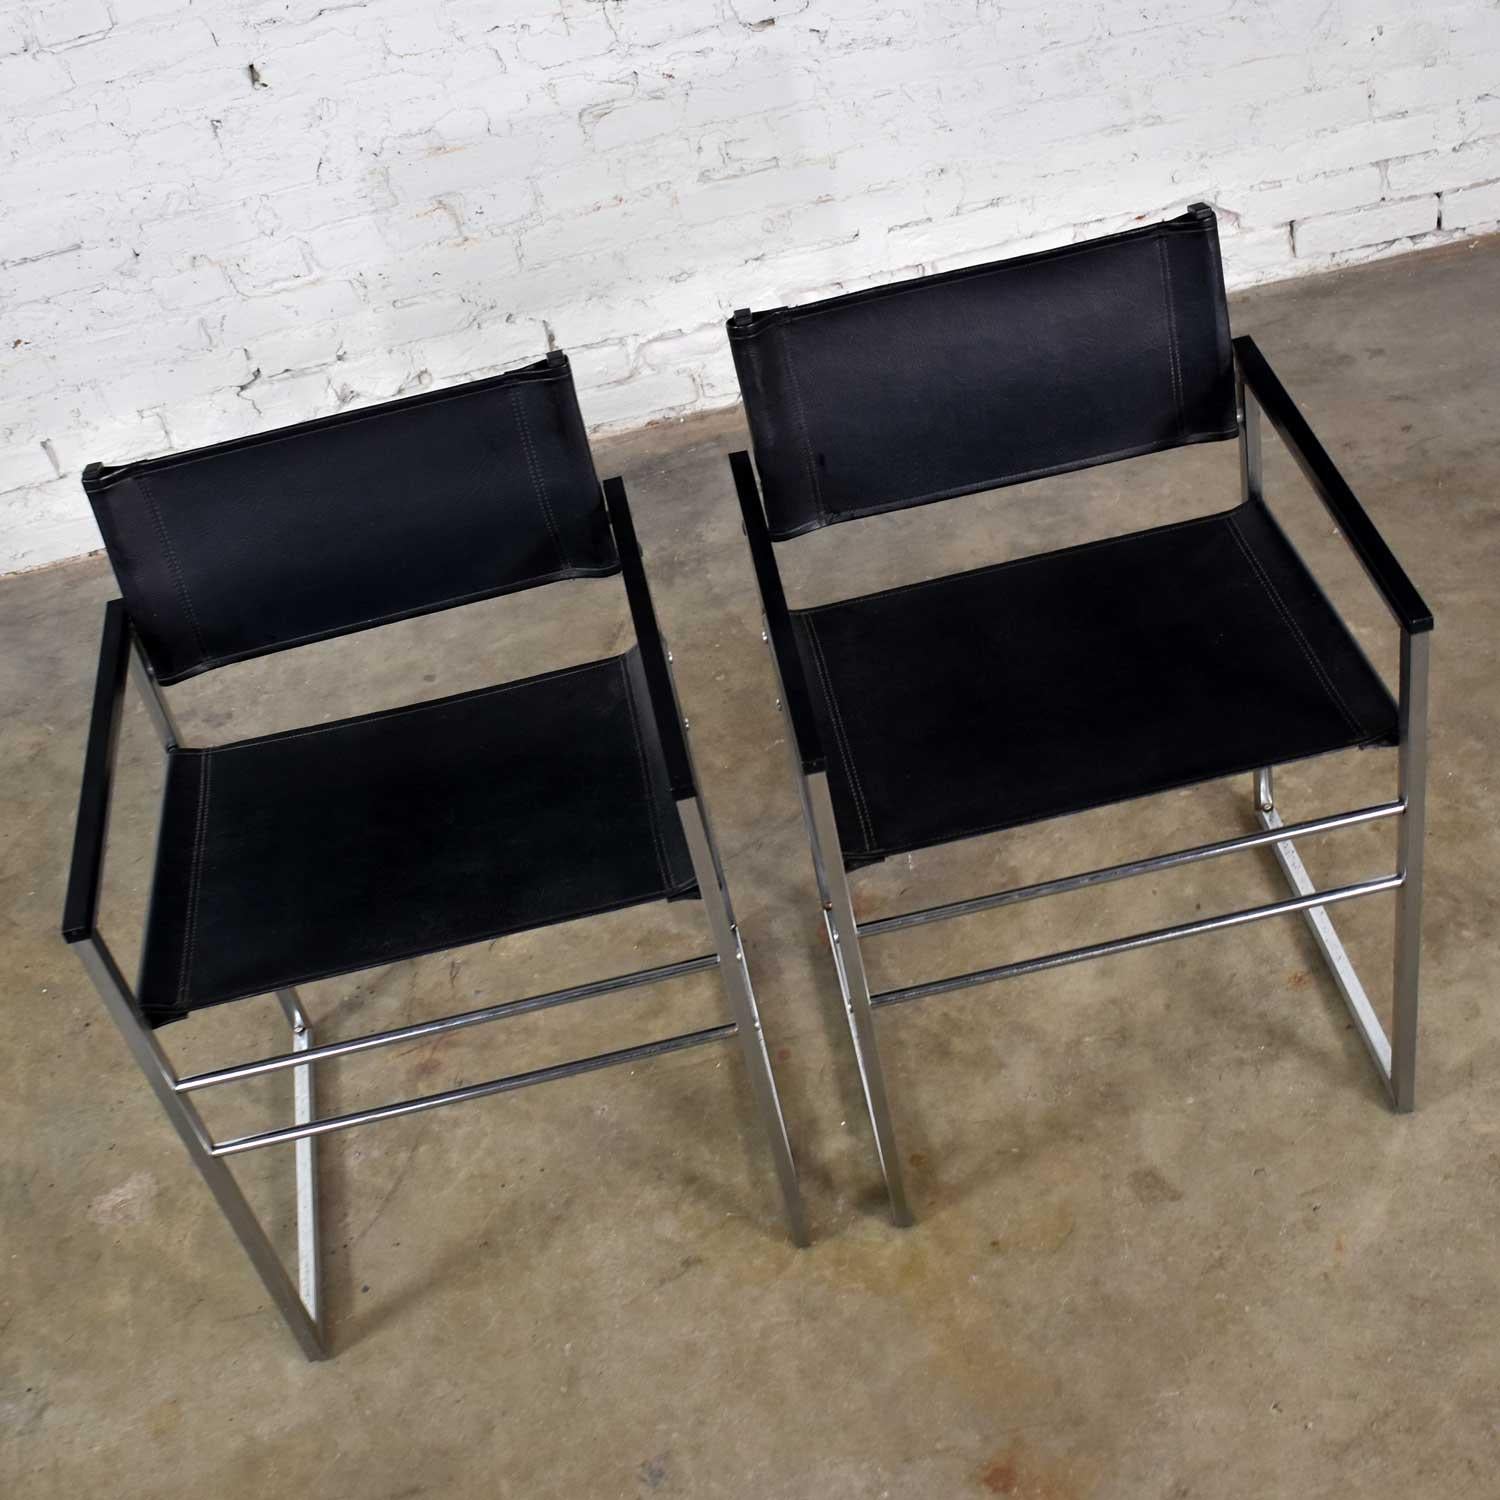 20th Century Chrome & Black Vinyl Faux Leather Sling Director’s Chairs Straight Legs, a Pair For Sale